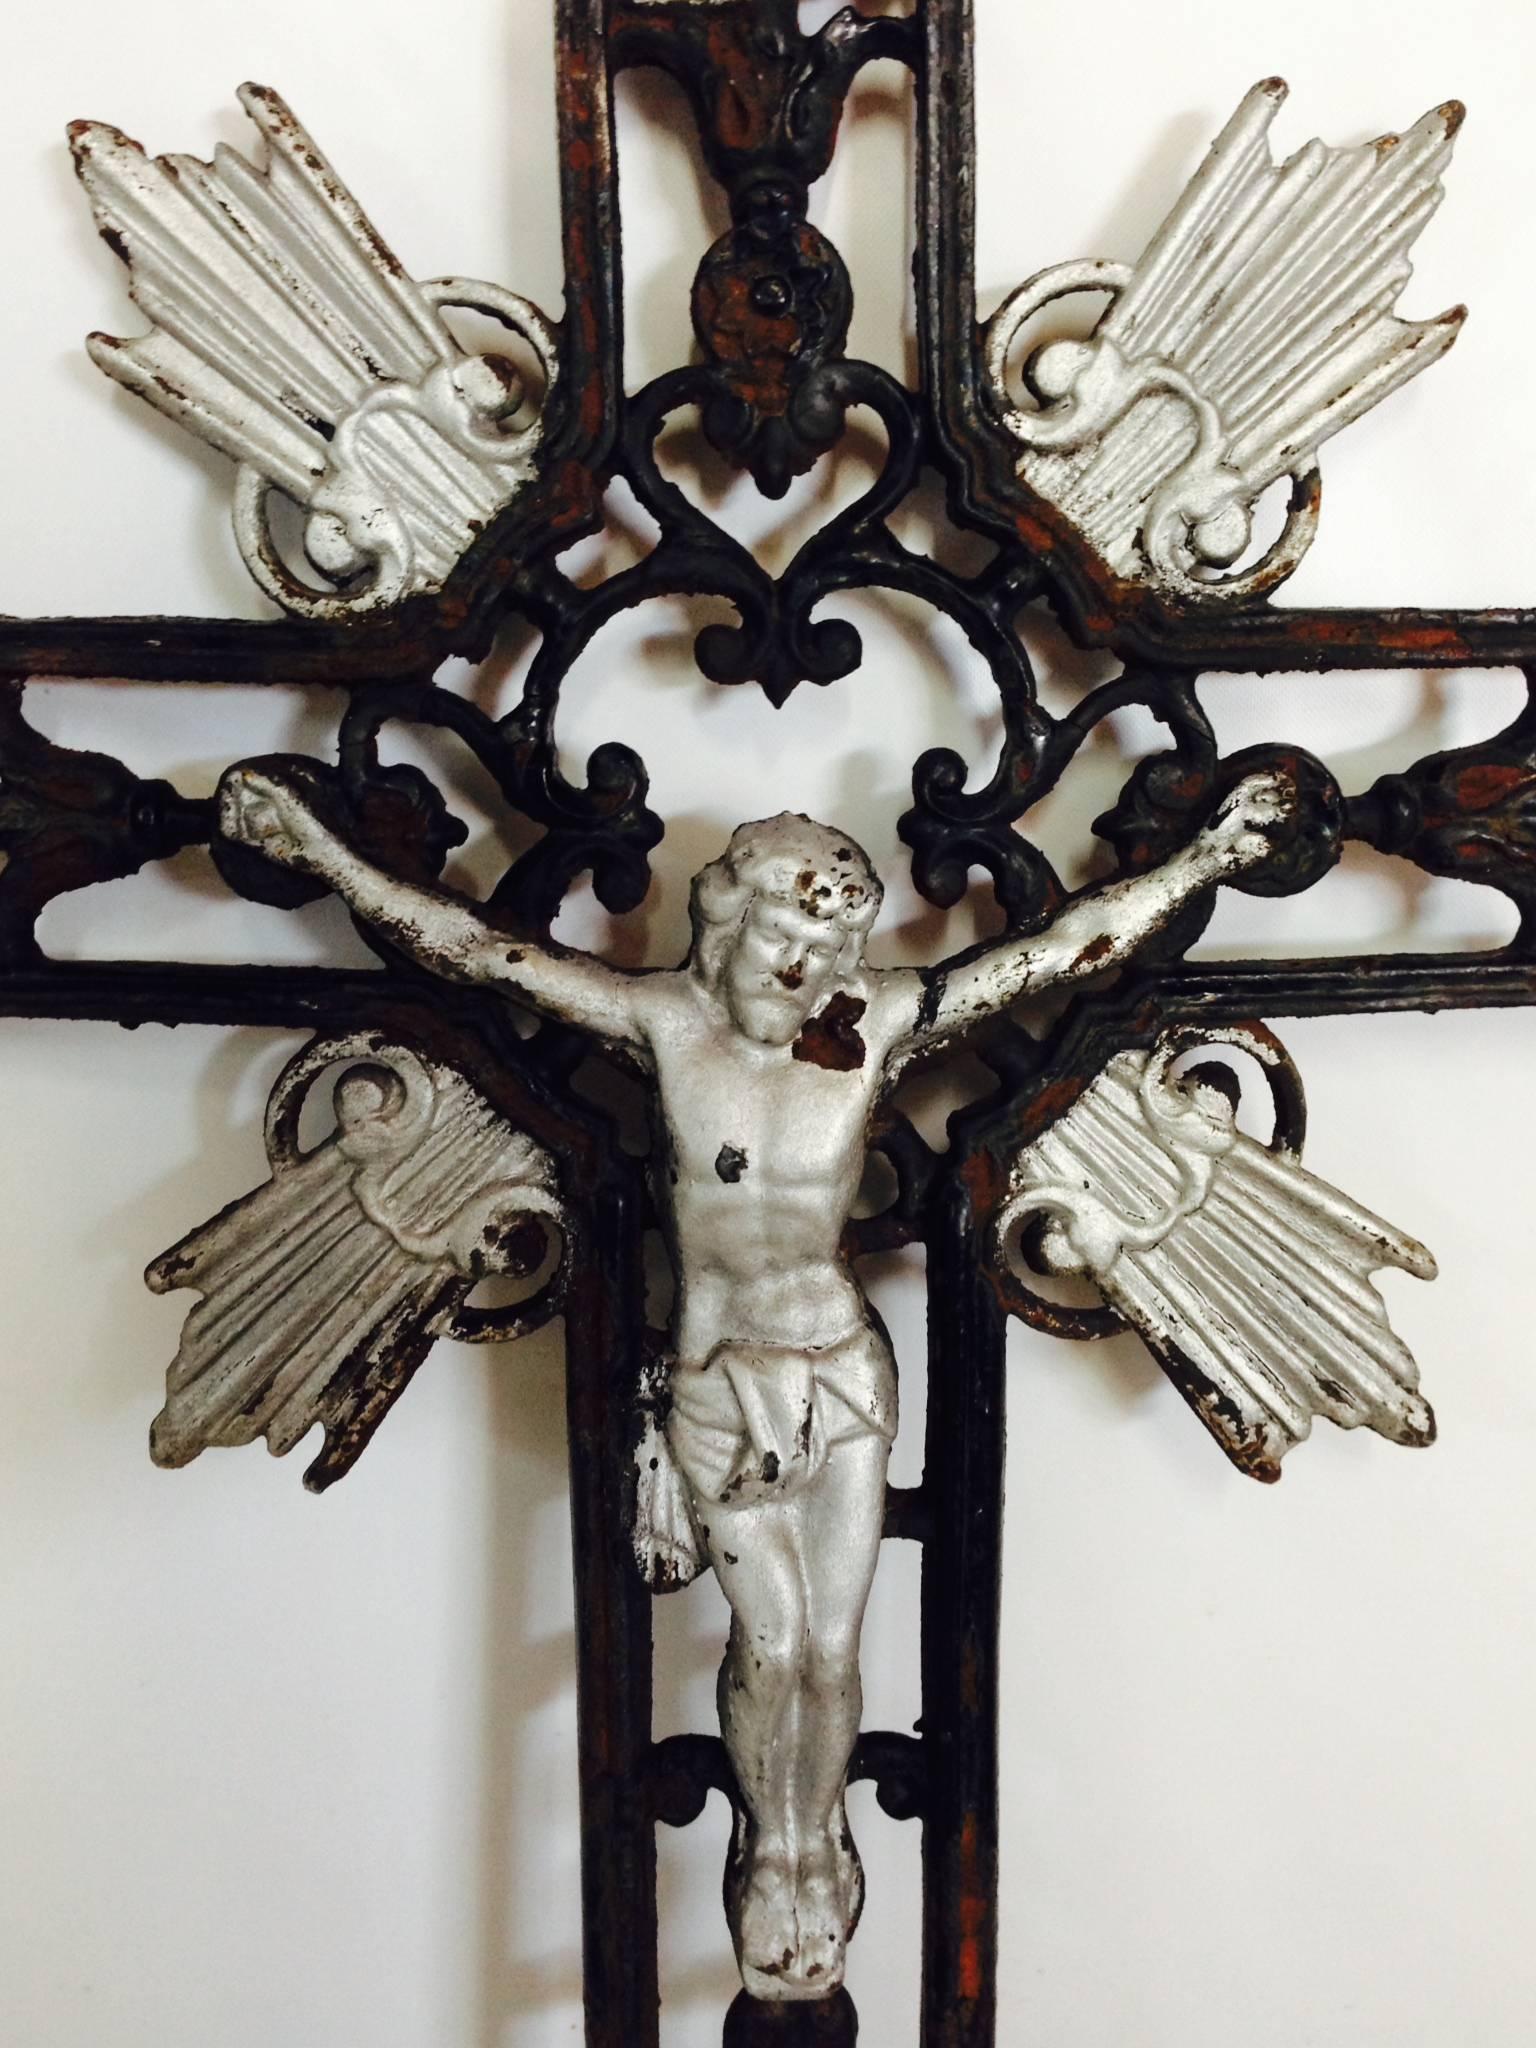 Silvered 20th Century French Art Deco Style Architectural Cast Iron Grave Marke Crucifix